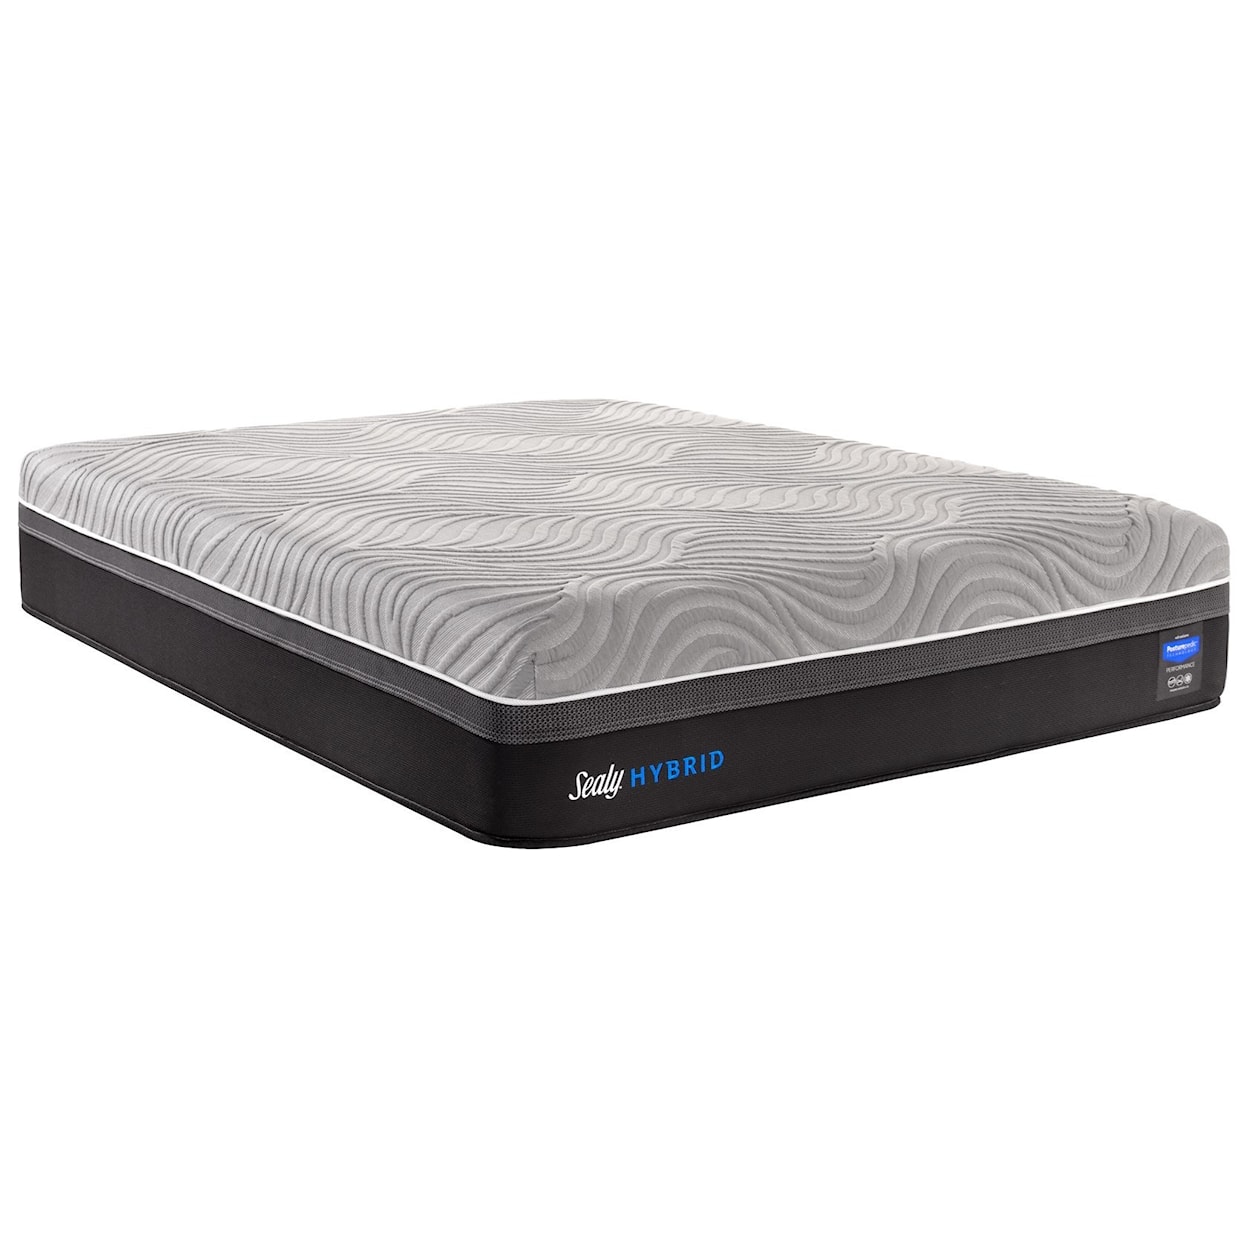 Sealy Performance Z9 Copper II Firm Cal King Firm Hybrid Mattress